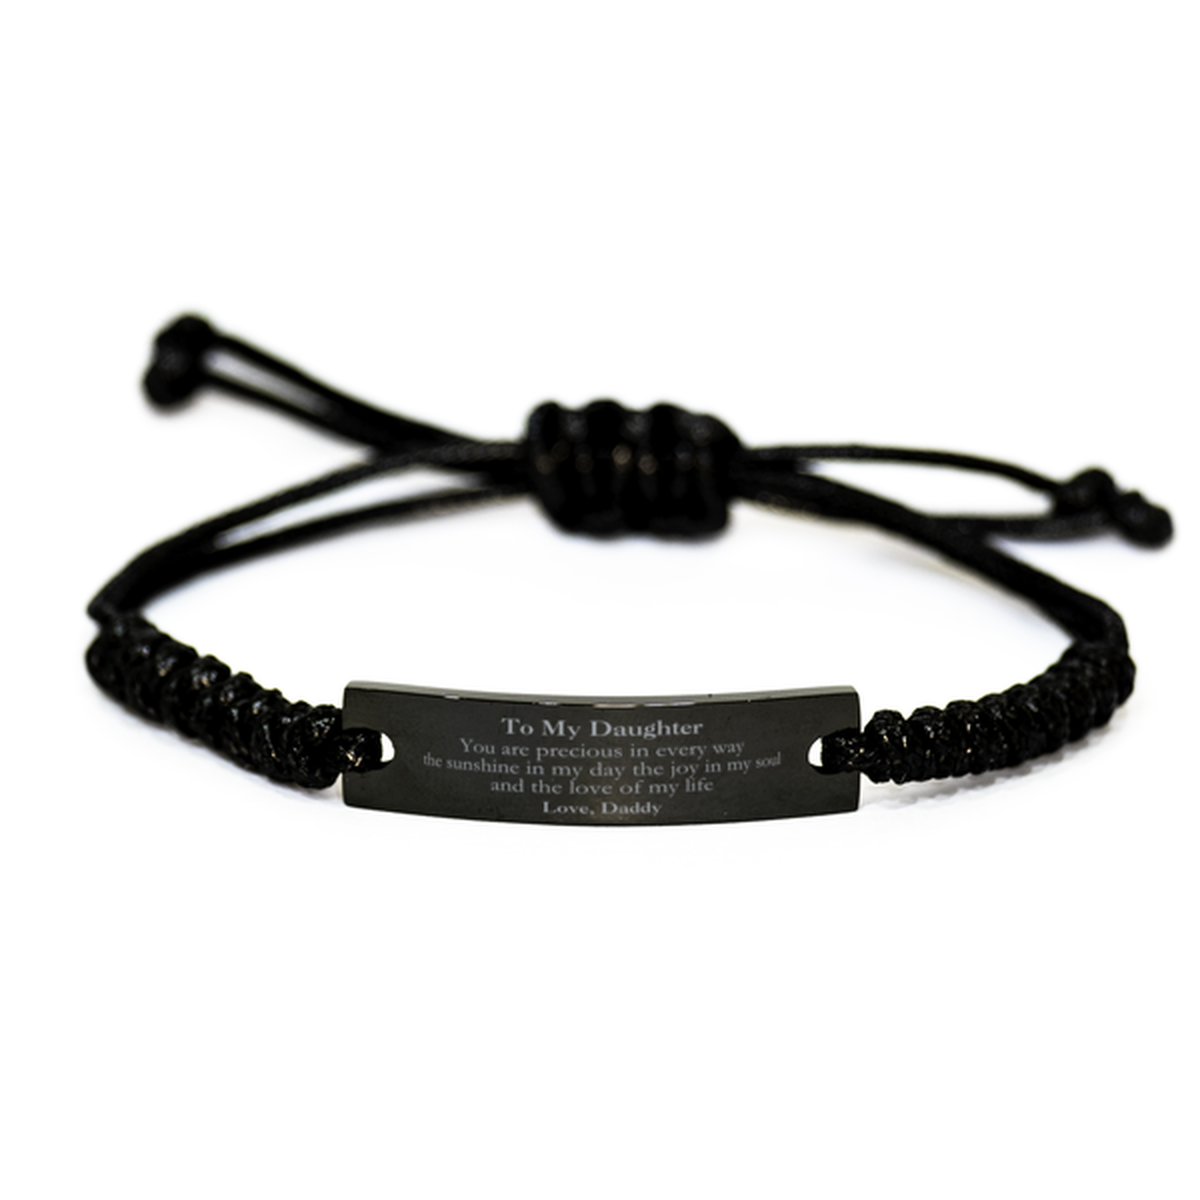 Graduation Gifts for Daughter Black Rope Bracelet Present from Daddy, Christmas Daughter Birthday Gifts Daughter You are precious in every way the sunshine in my day. Love, Daddy